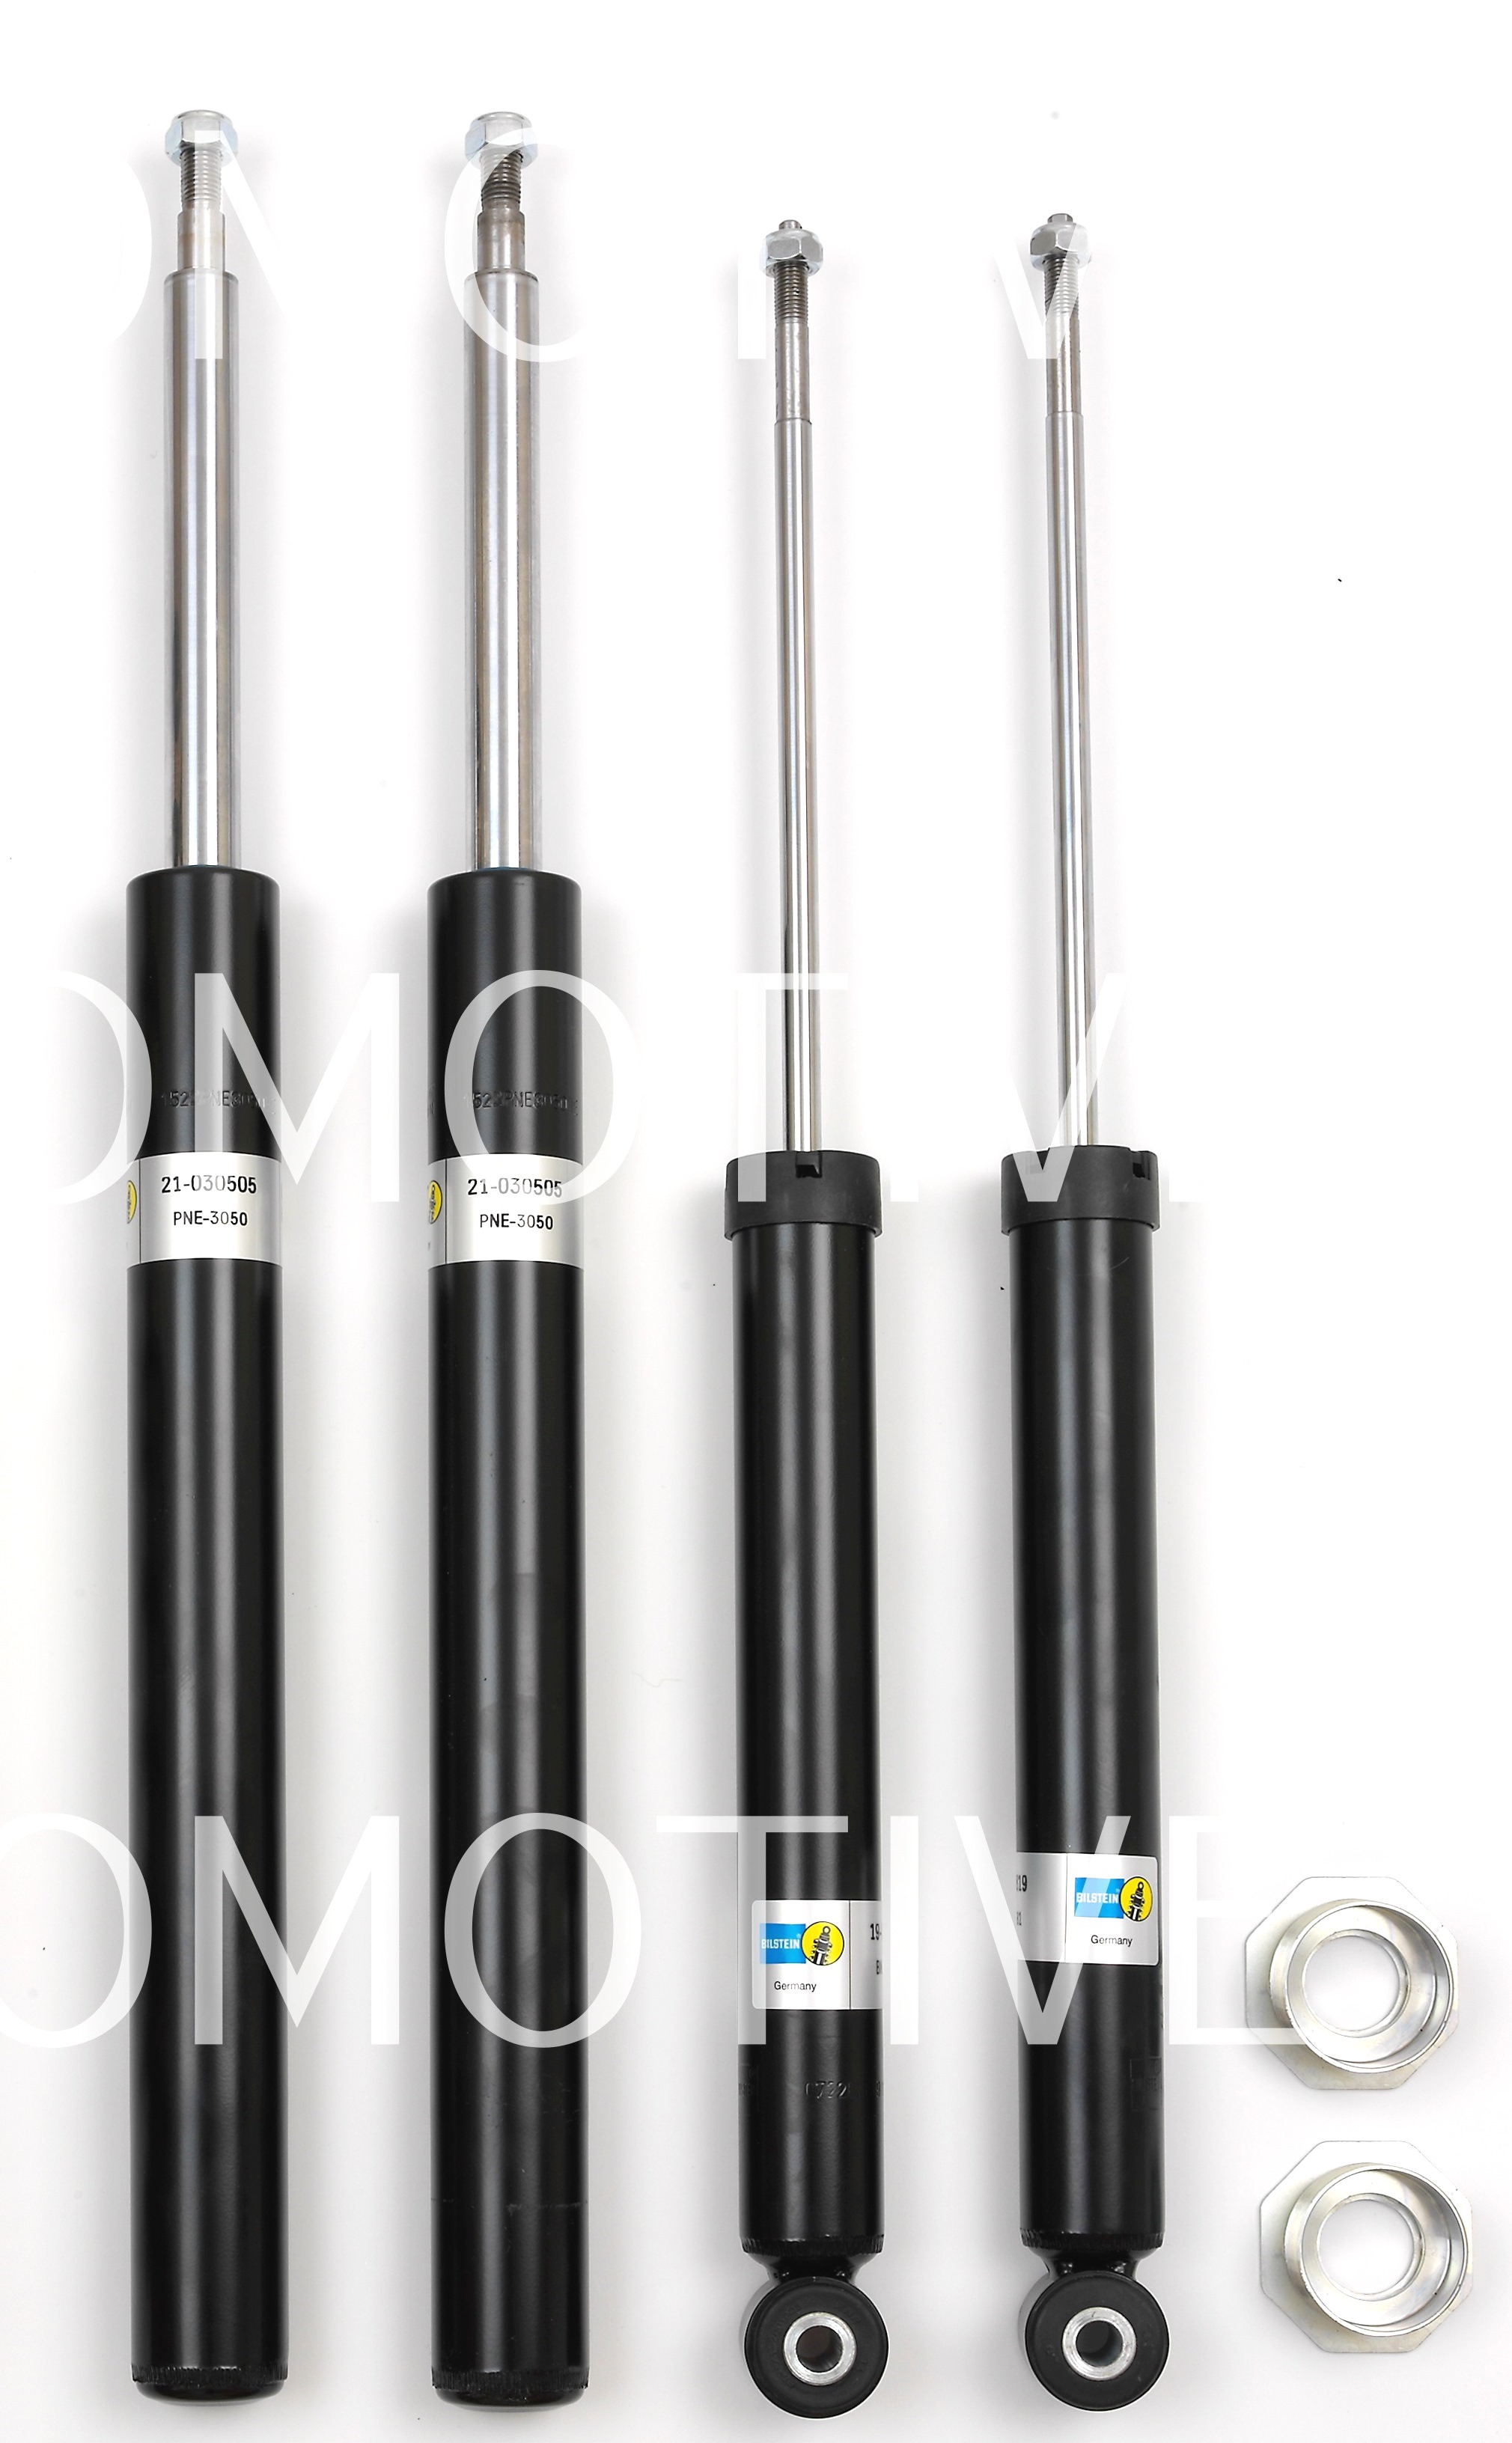 4x Bilstein B4 Front & Rear Shock Absorbers set For BMW 3 (E30) 82-89 325 i 21-030505, 19-019819